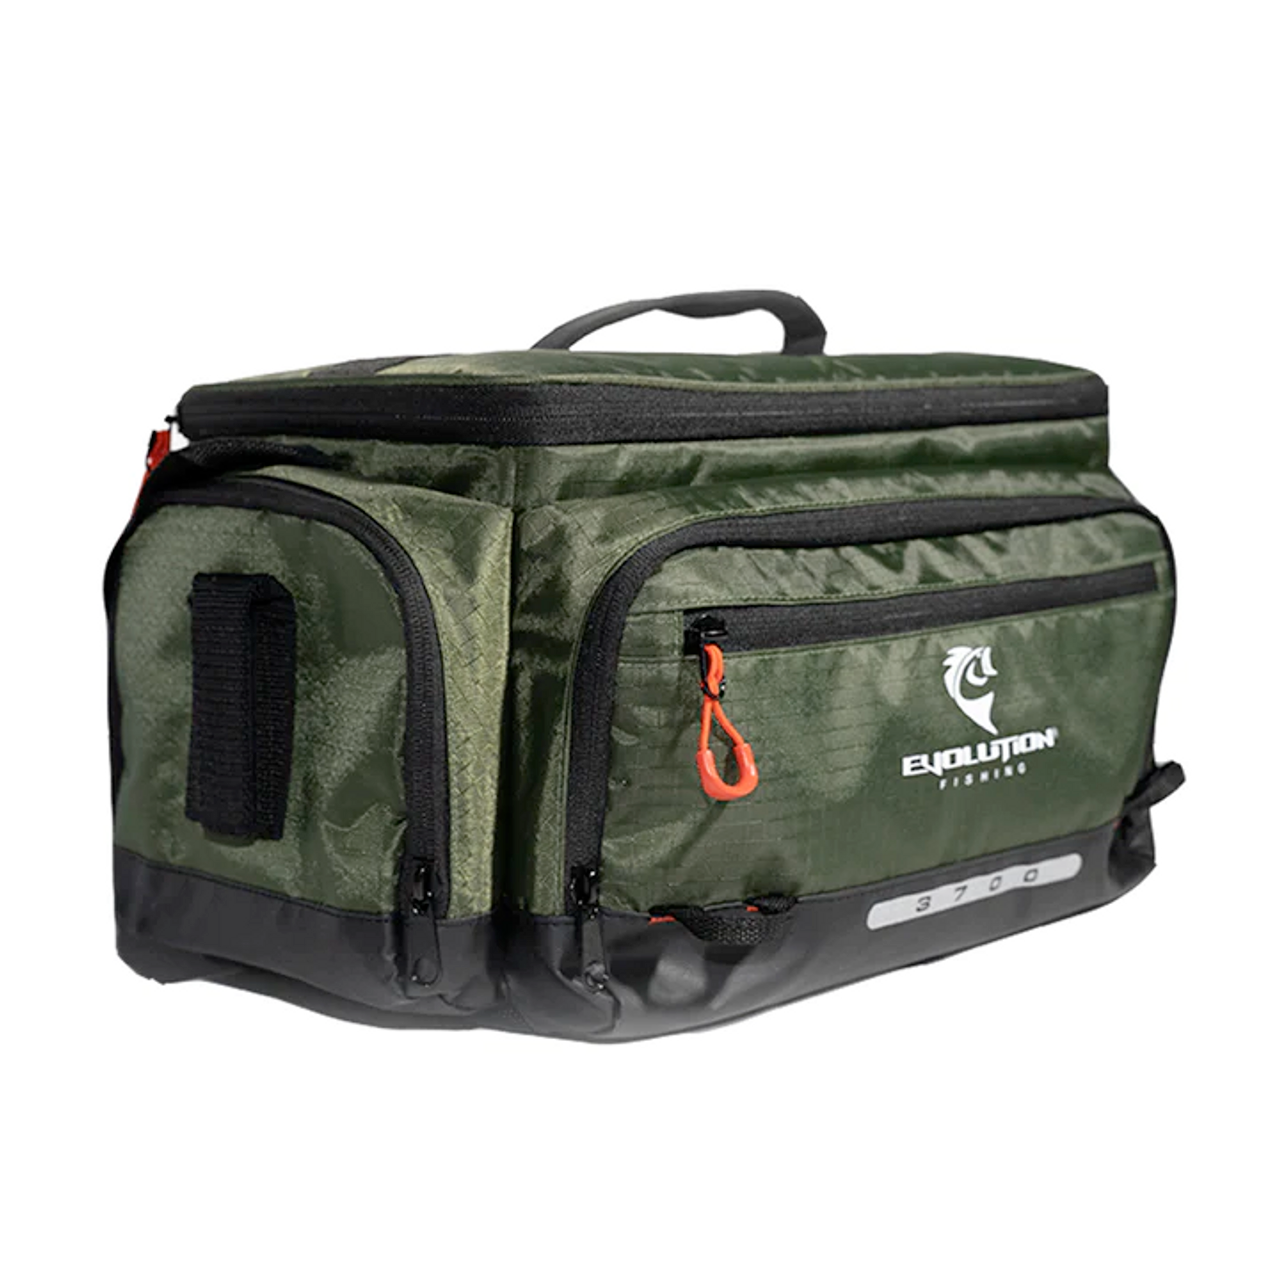 Evolution 3700 Smallmouth Tackle Bag, Olive, 3 Trays Included